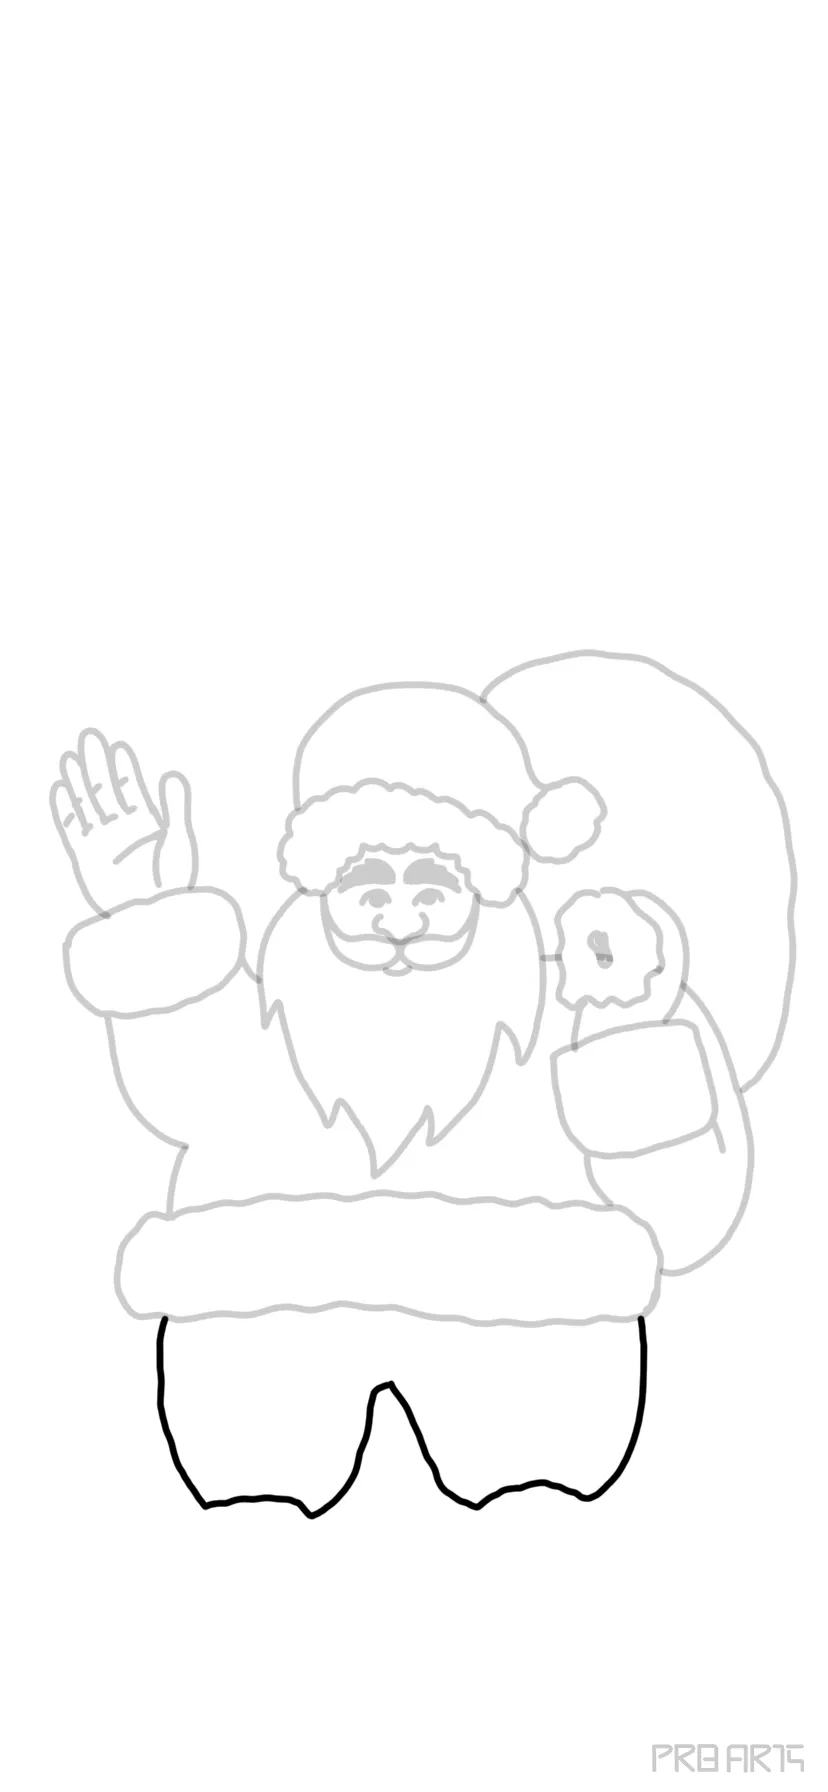 Santa Claus With Sack Of Toys HighRes Vector Graphic  Getty Images